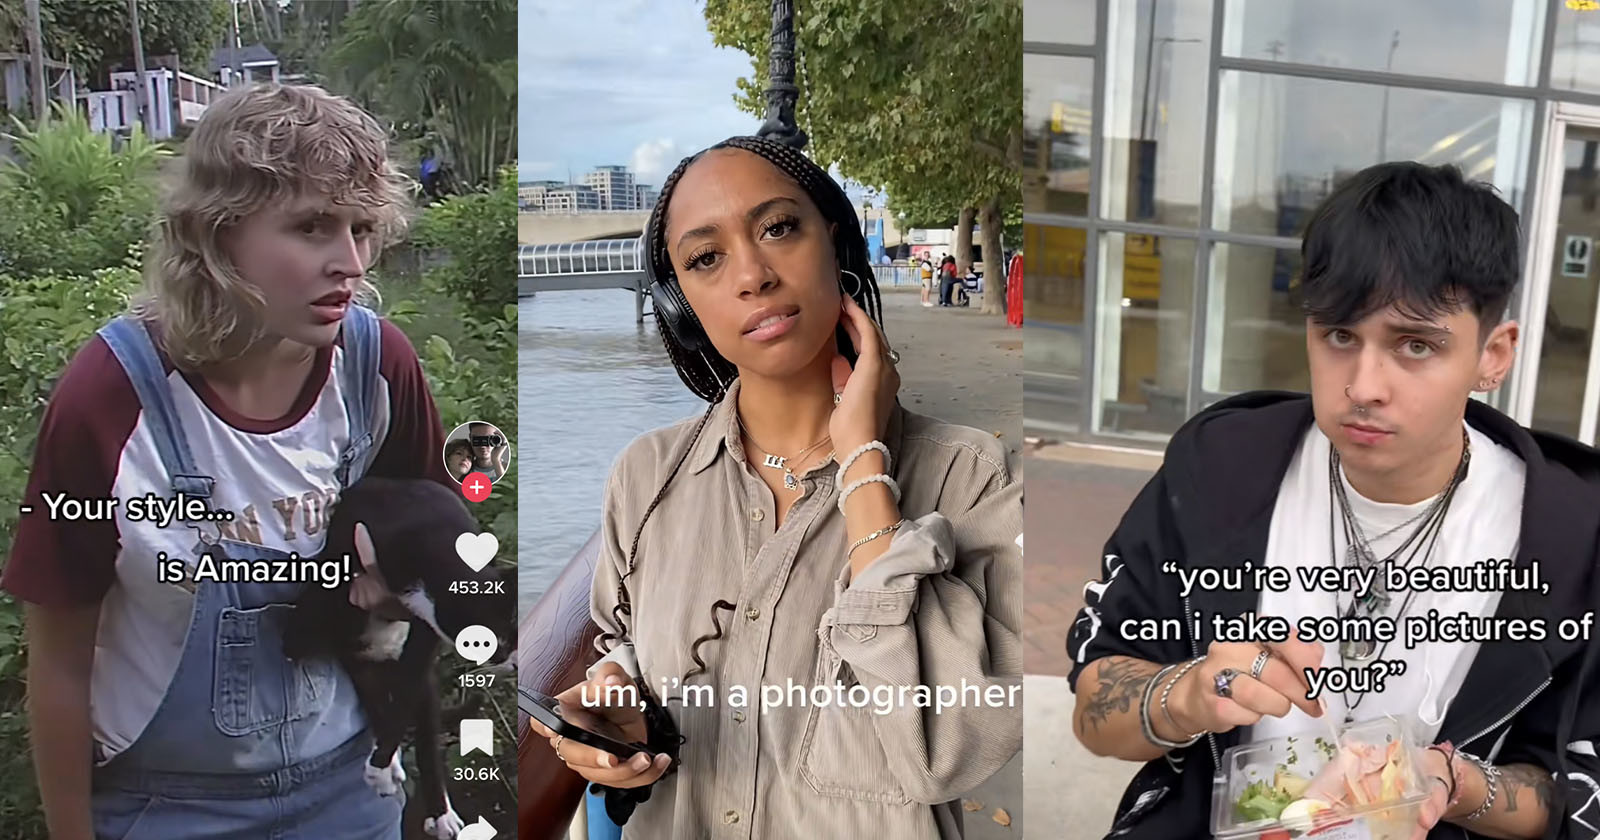 Street Photographers Mocked For How They Approach Strangers